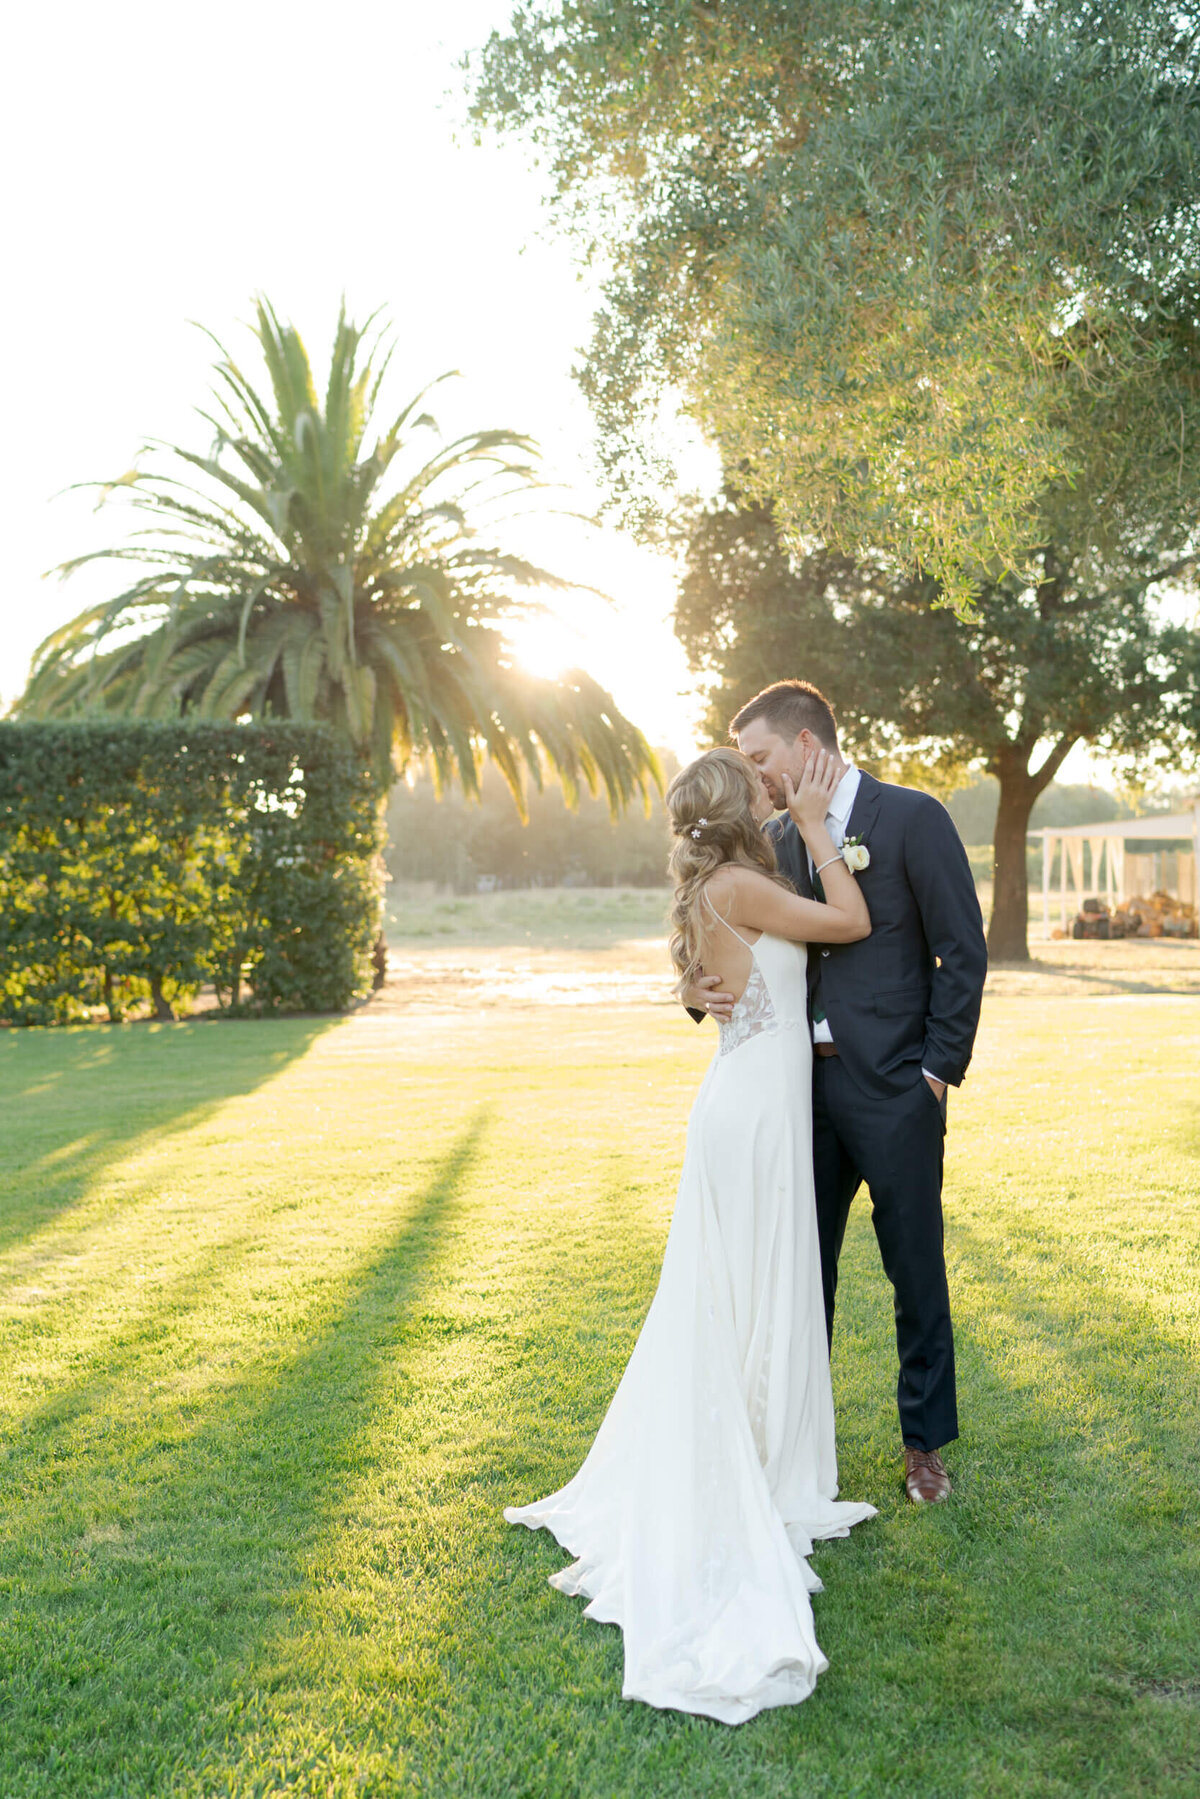 Estate Wedding Photography of a newly-wed couple kissing at the state's garden with shimmering sunset rays in the background.